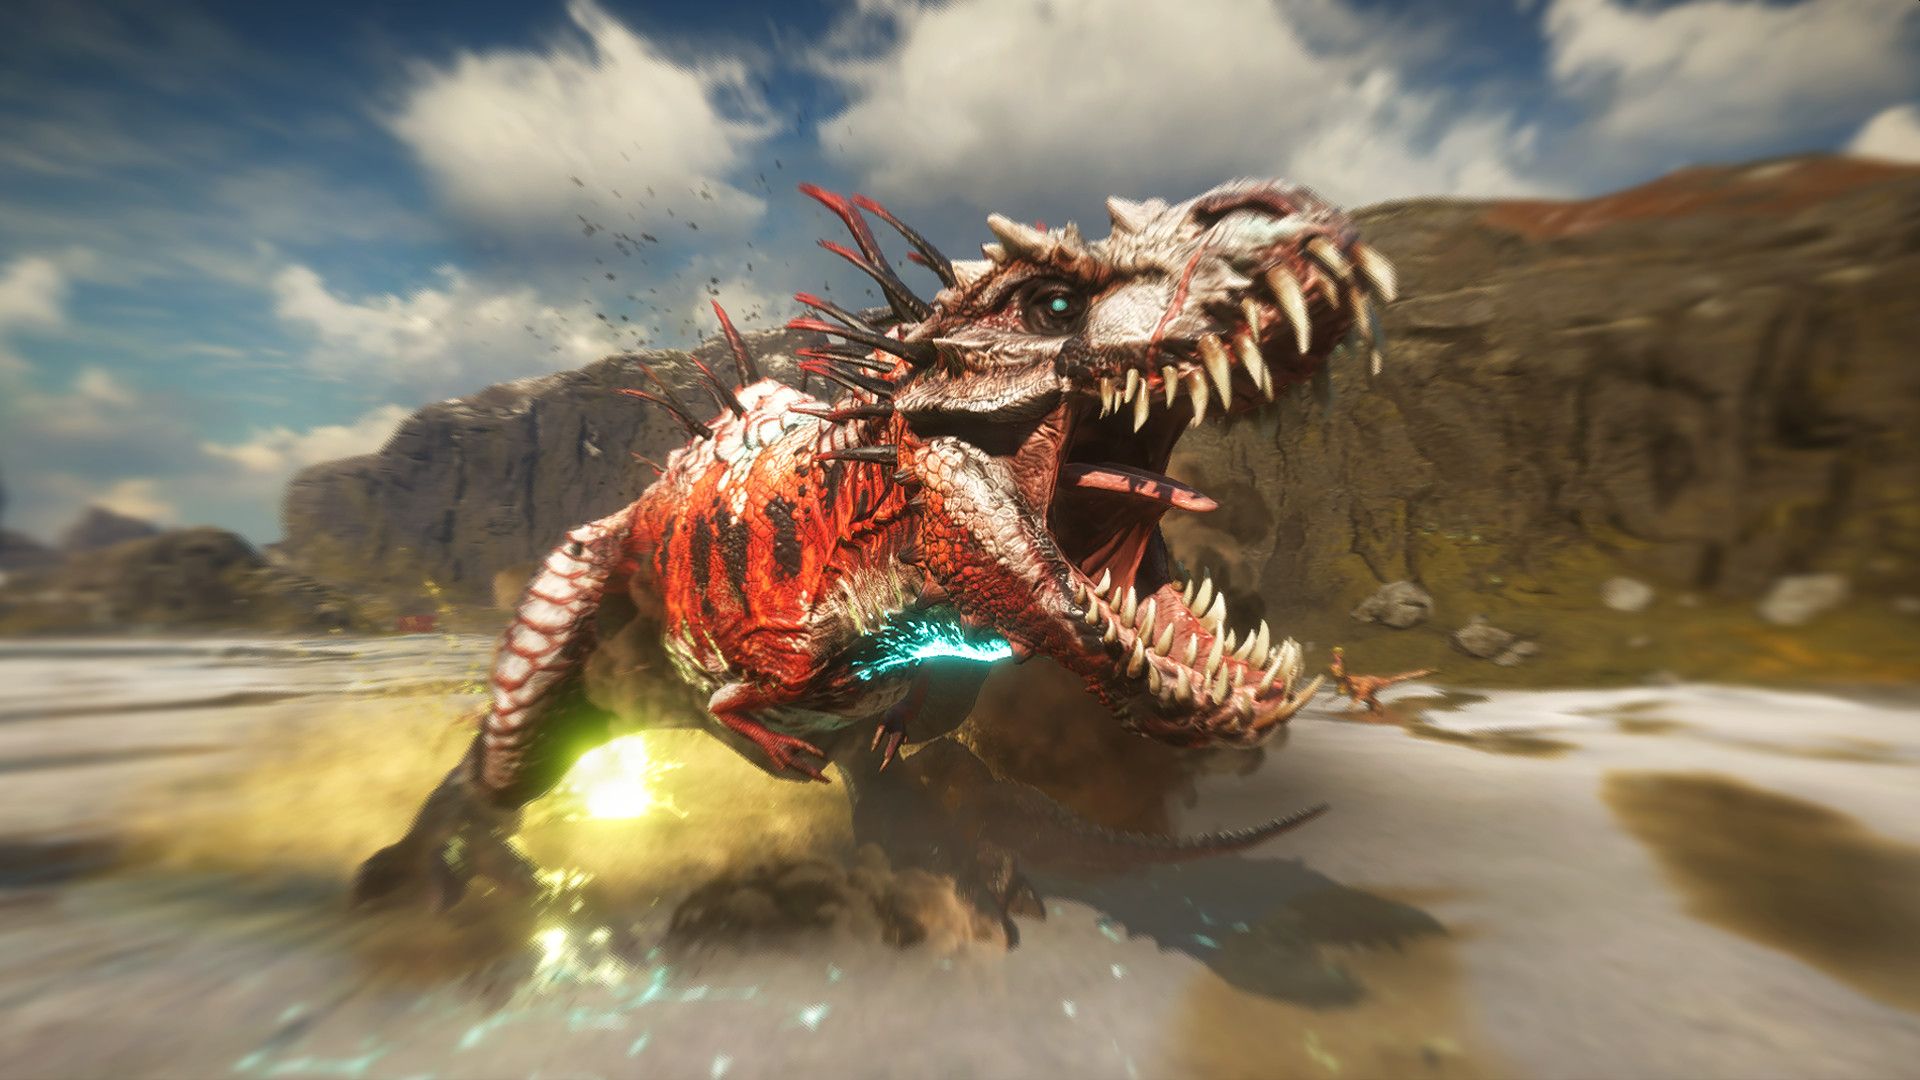 In today’s free game from Epic, you must kill all the dinosaurs again